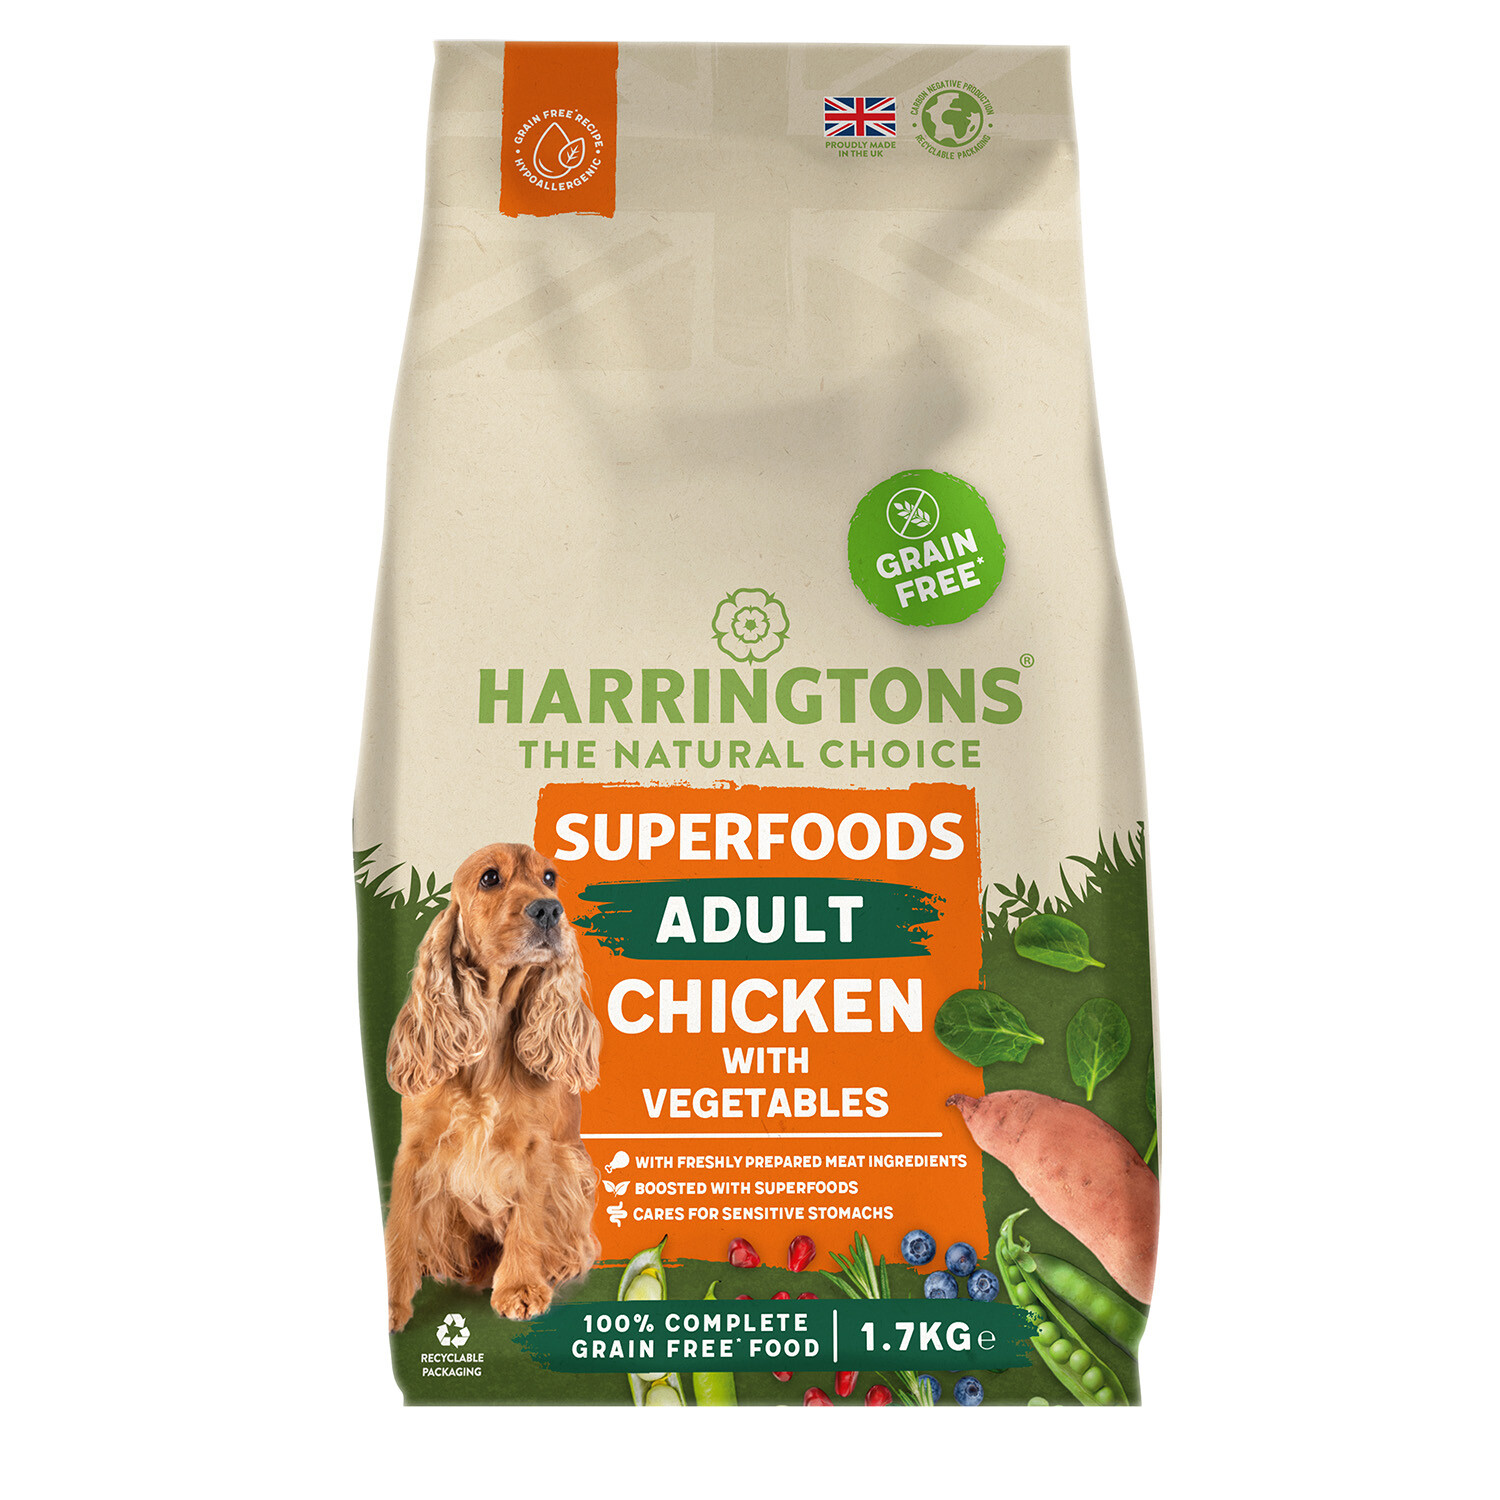 Harringtons Superfoods Dry Dog Food - Chicken with Vegetables Image